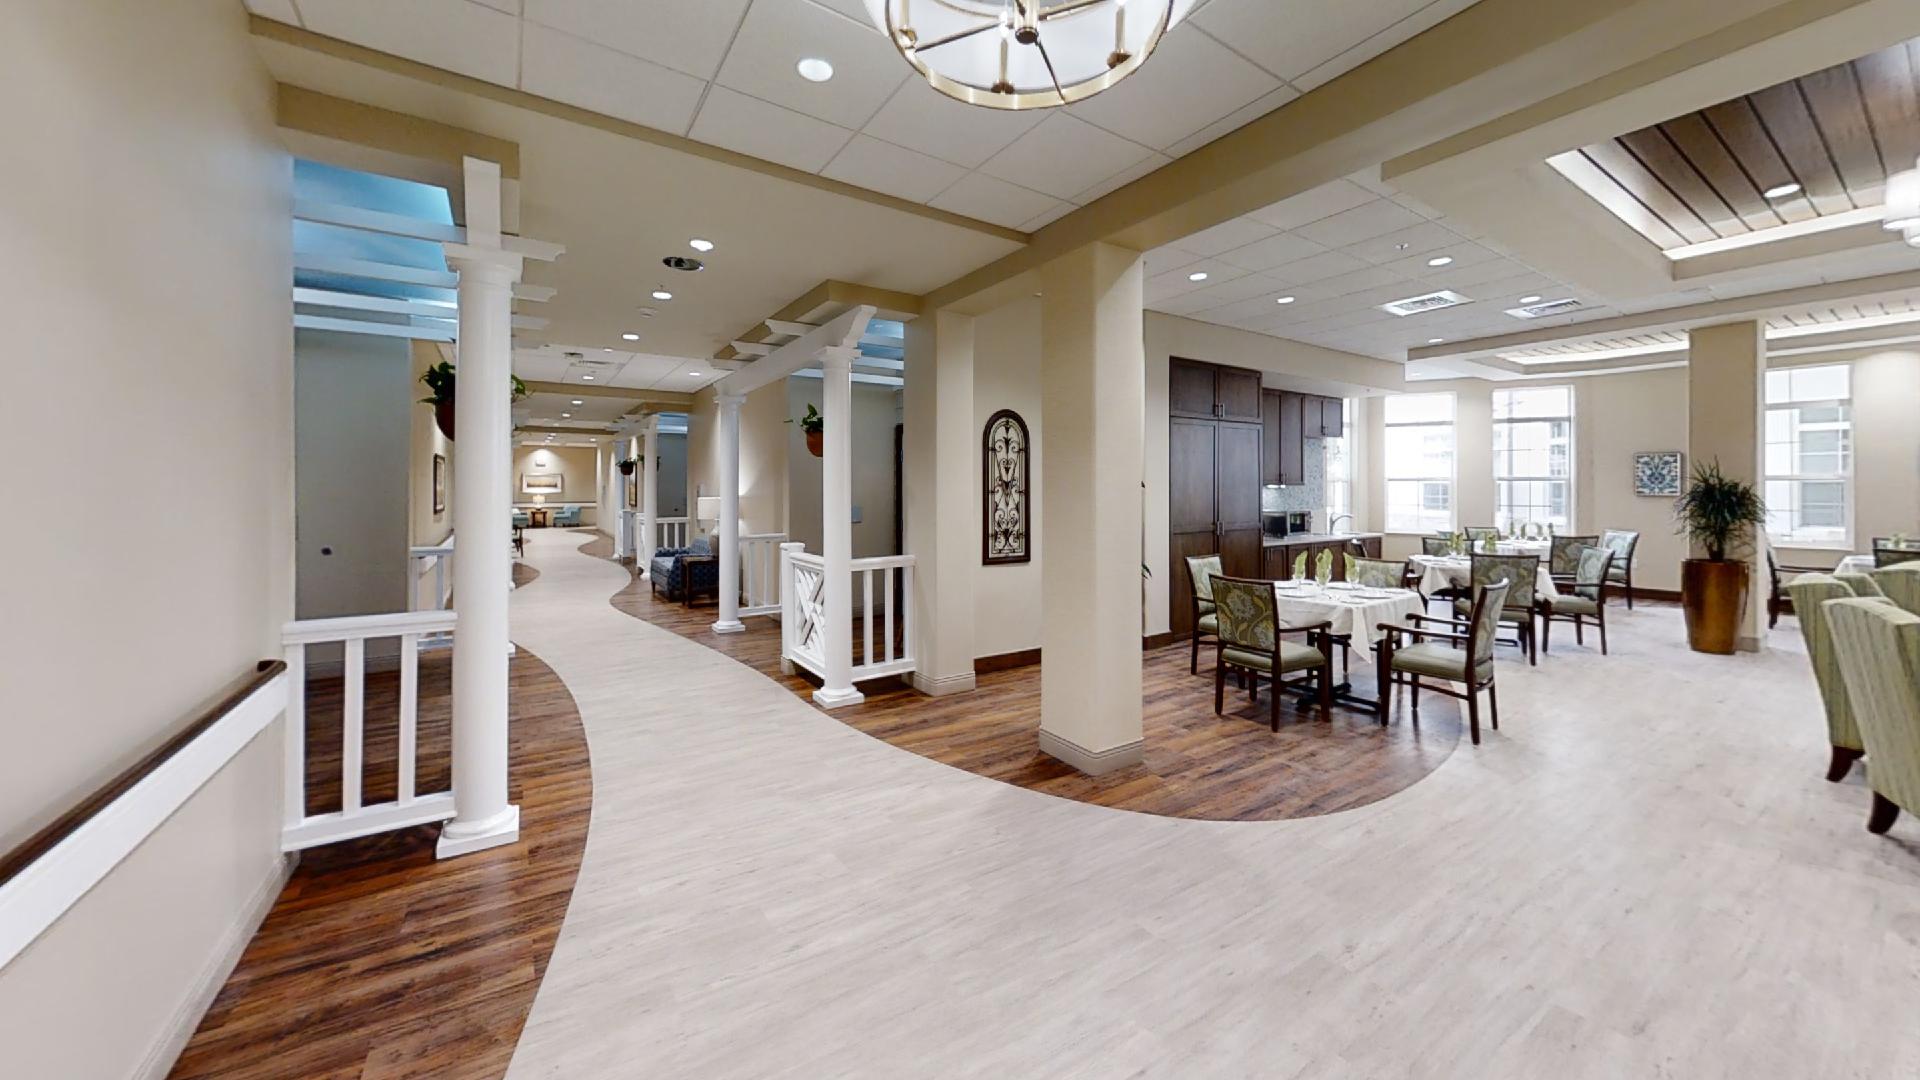 Aravilla Clearwater Memory Care Community - Lobby Area